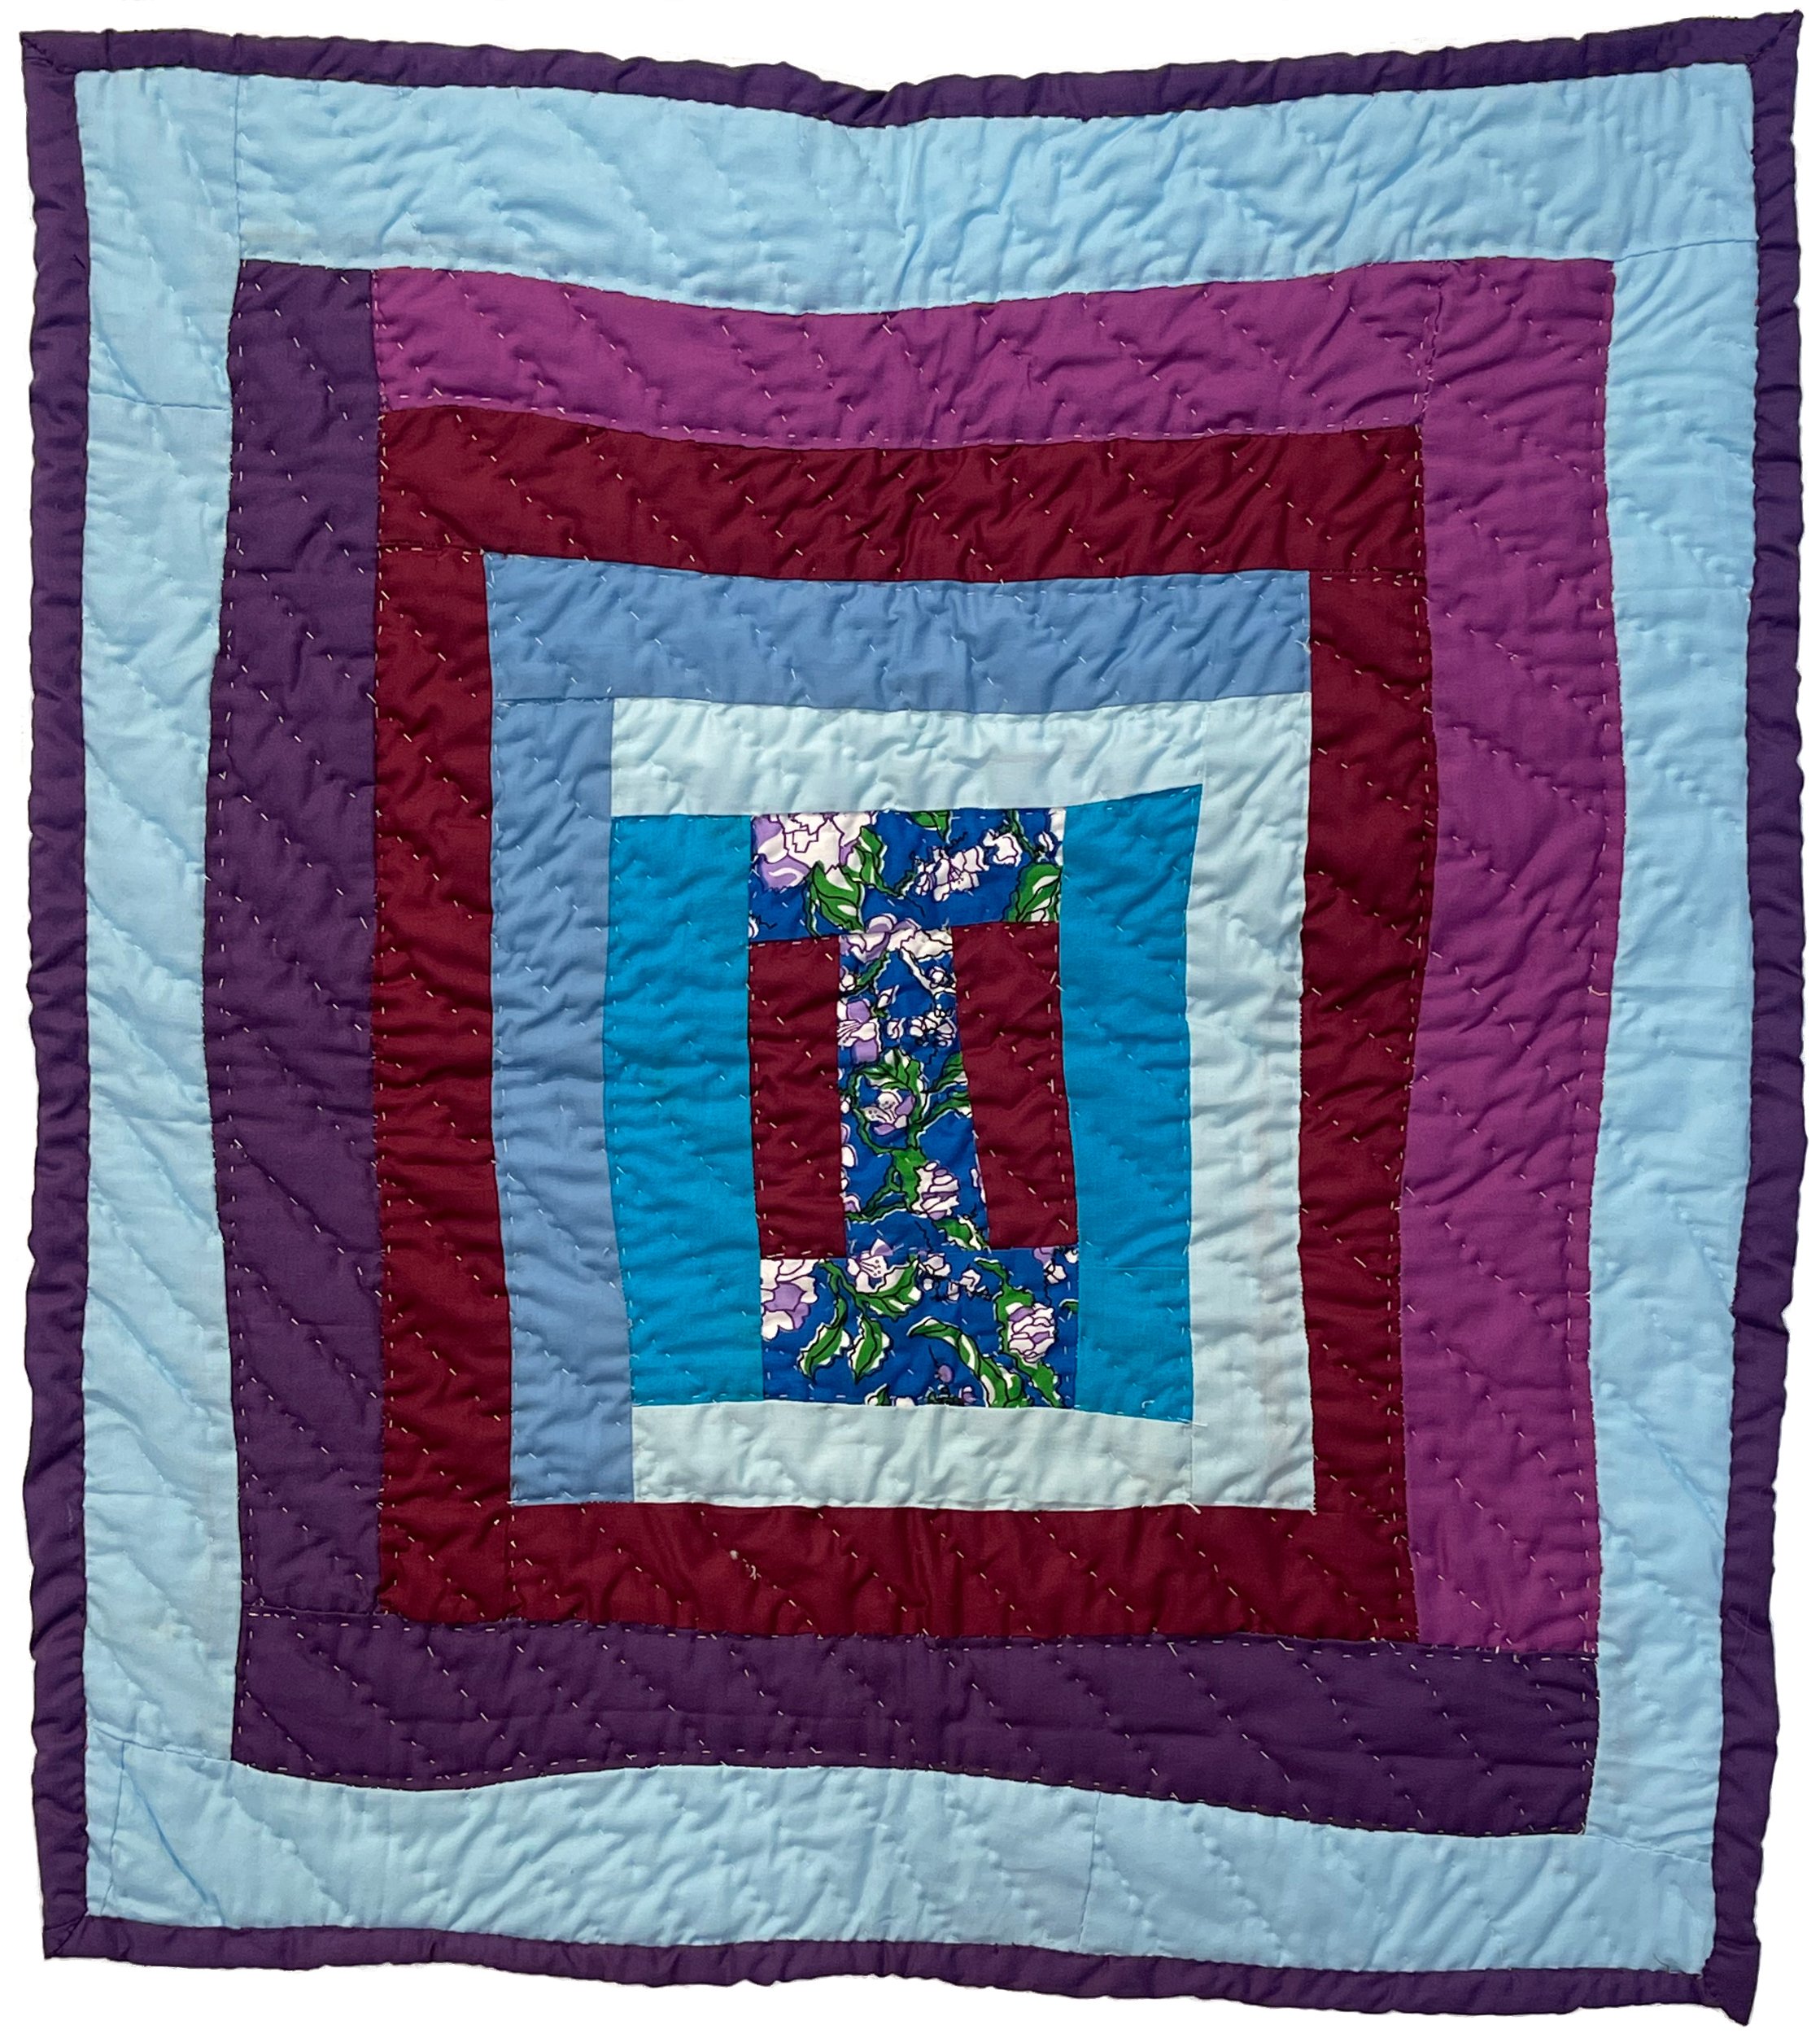   Kristin Pettway (Gee’s Bend, AL)    Housetop variation   2021  27” x 25”  Cotton fabrics  Hand-pieced, hand-quilted    ASK ABOUT THIS QUILT   